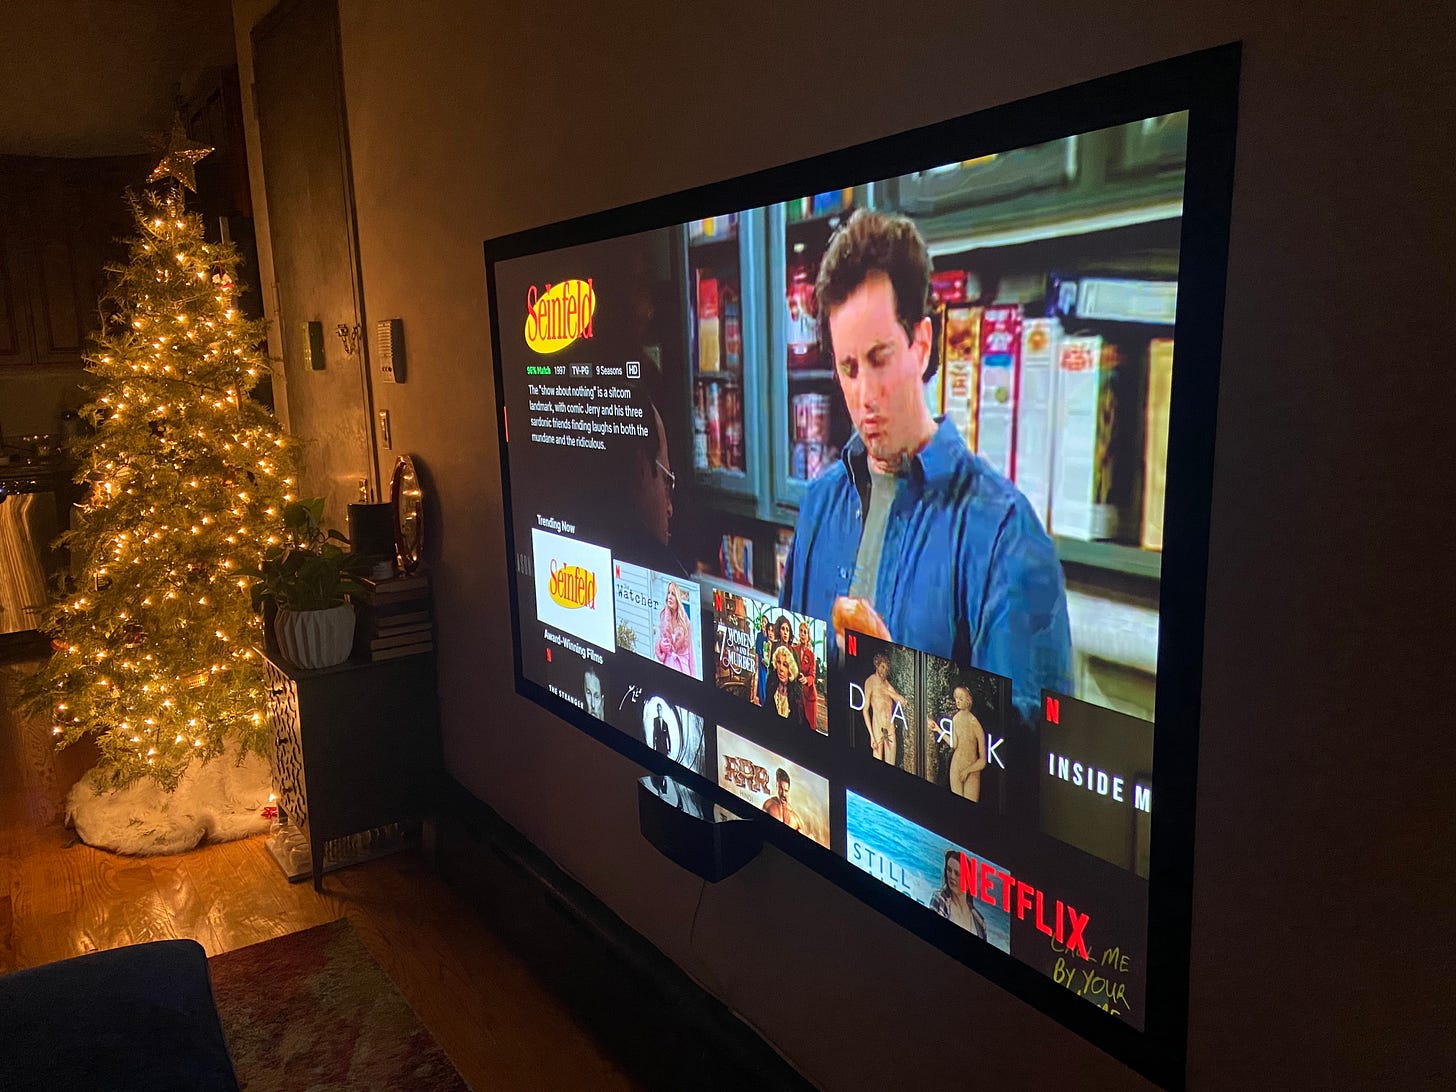 A Christmas tree lighting the new projector screen, which is displaying Seinfeld on the Netflix menu.